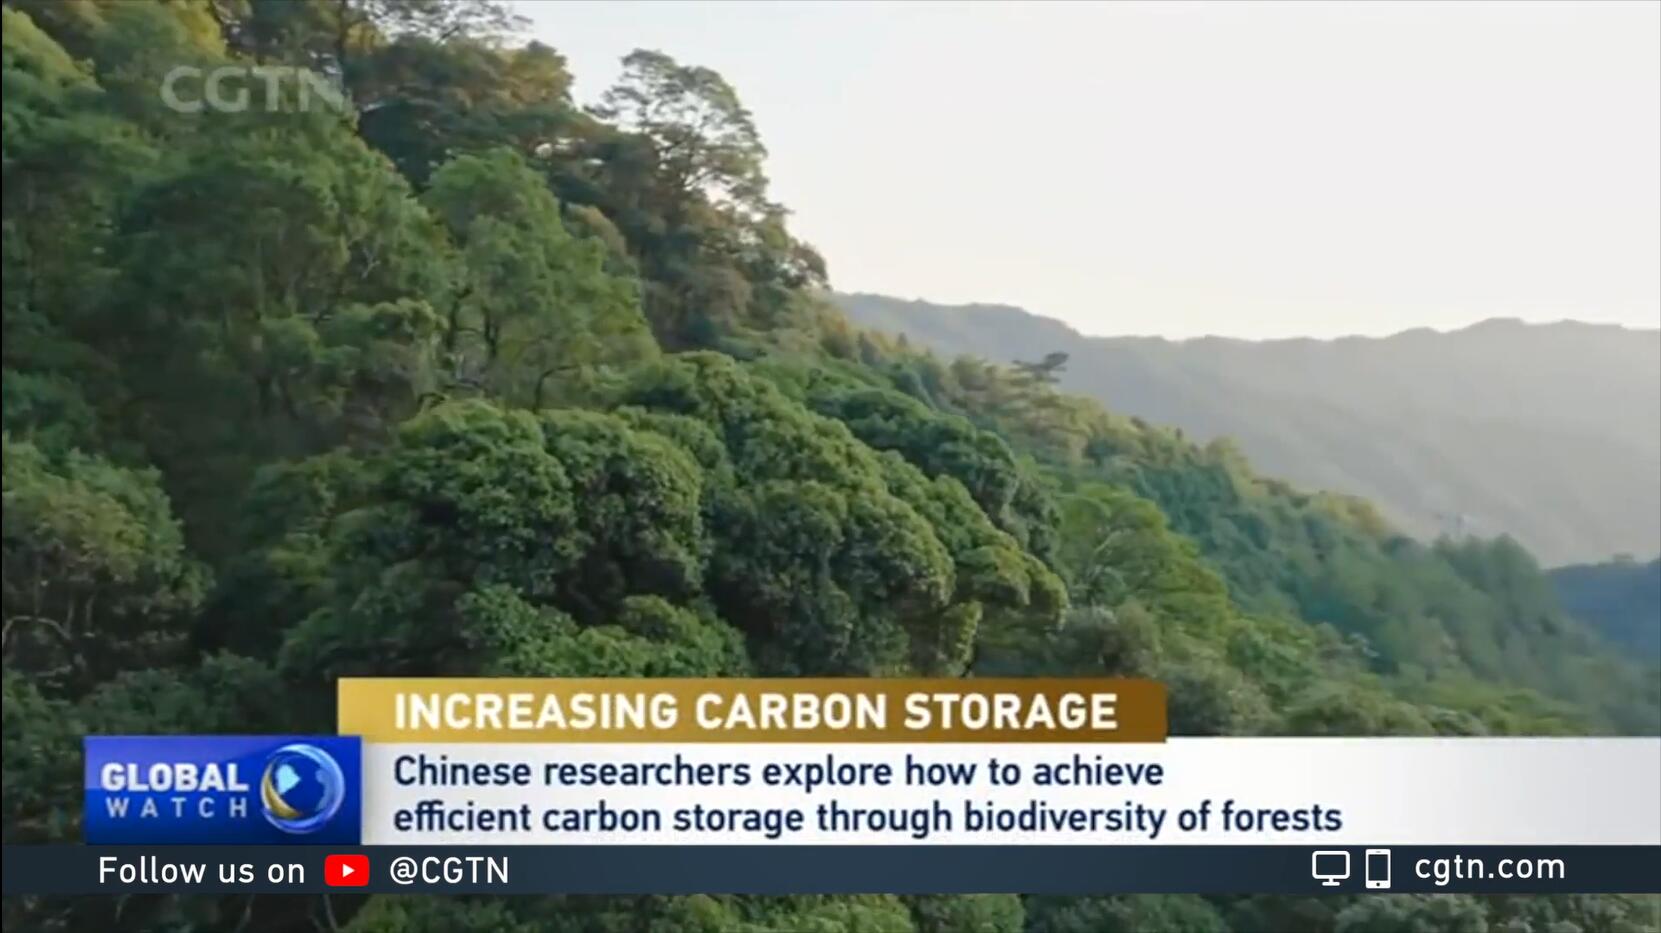 Diversified Forest Could Improve Carbon Storage